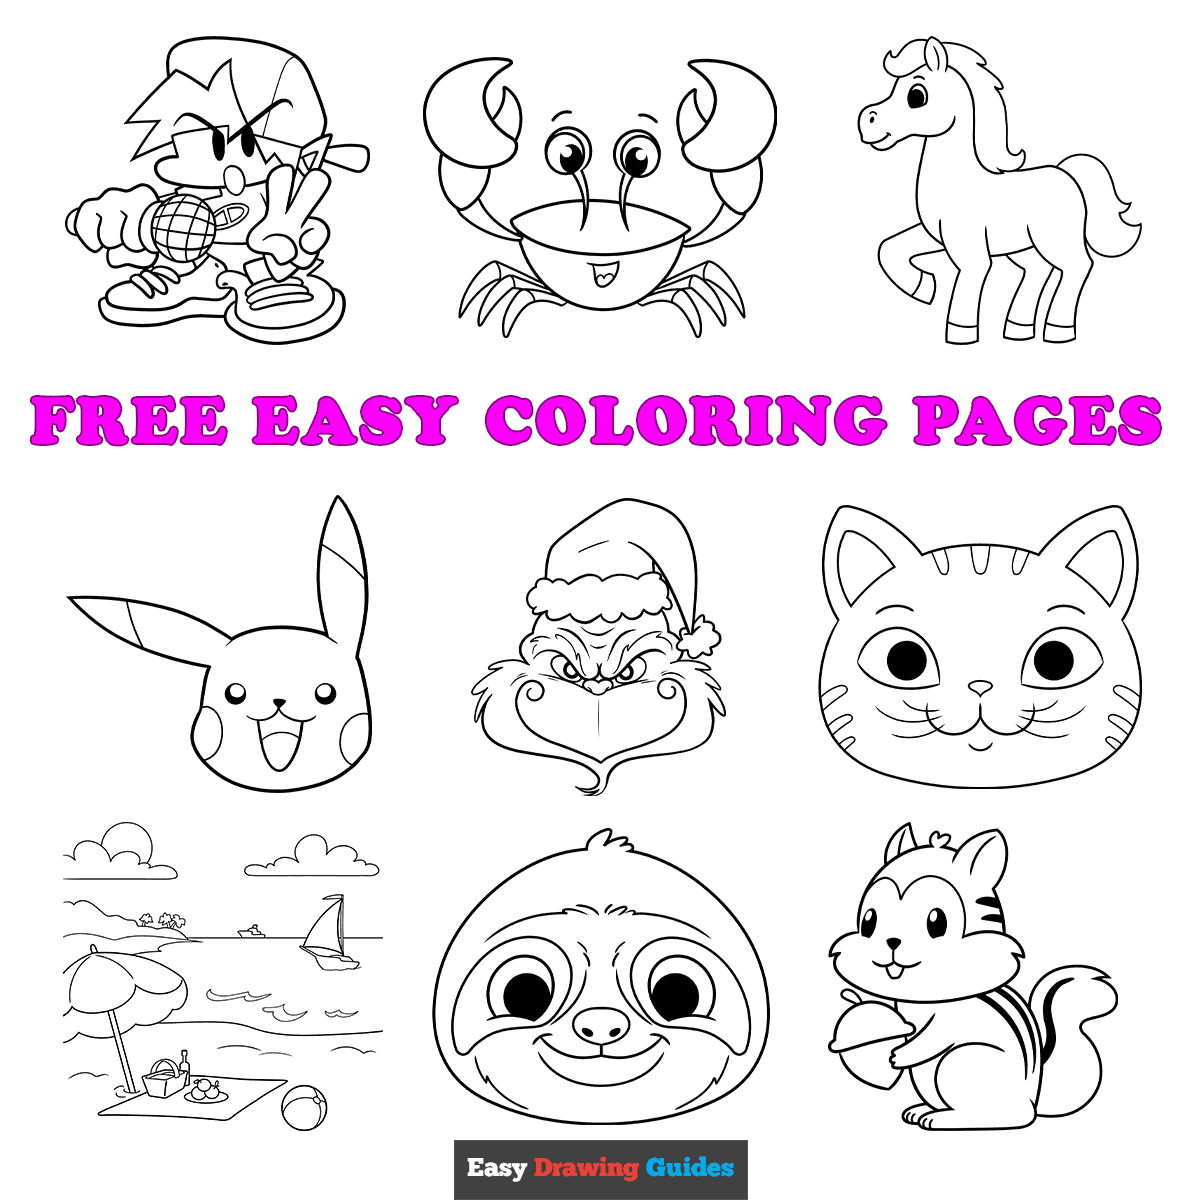 Free printable easy coloring pages for kids